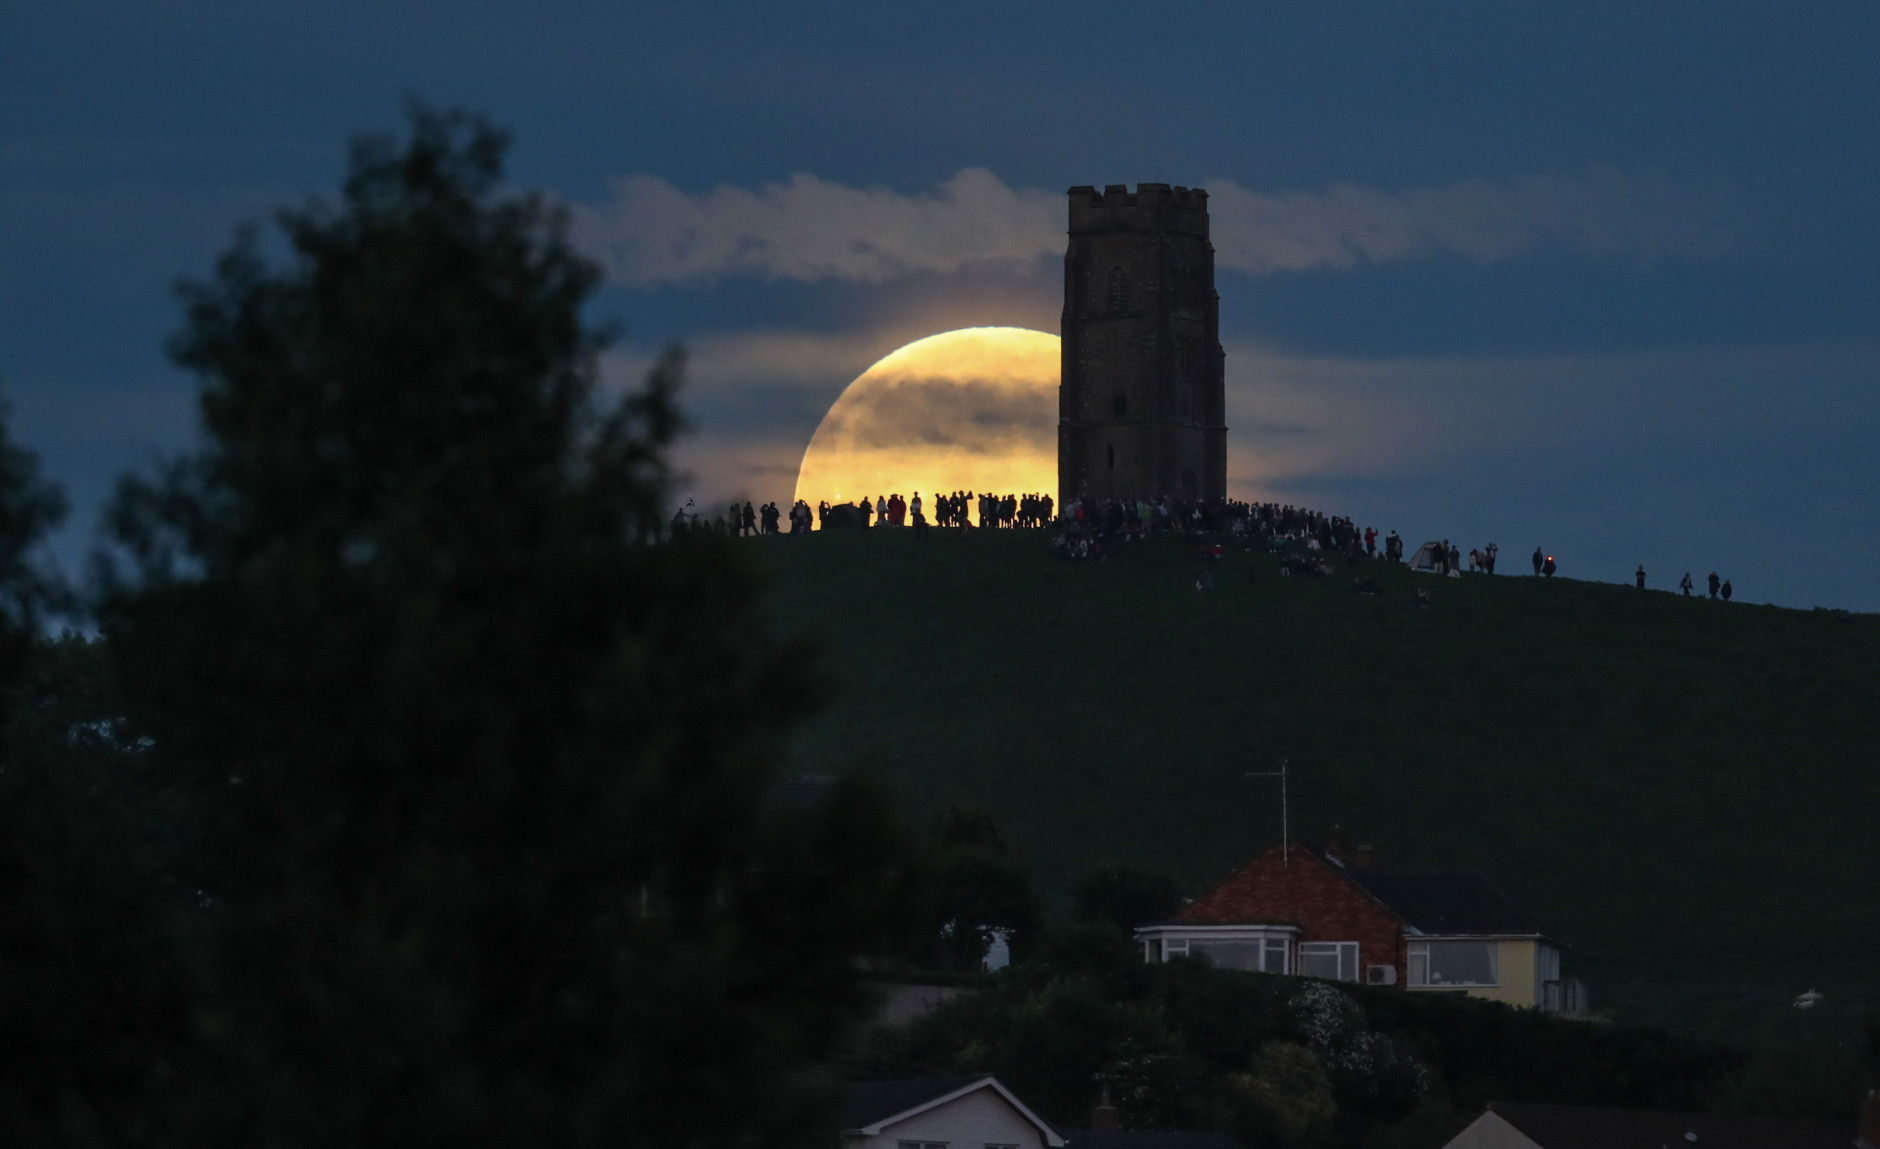 A full moon rises behind Glastonbury Tor as people gather to celebrate the summer solstice on June 20, 2016 in Somerset, England. Tonight's strawberry moon, a name given to the full moon in June by Native Americans because it marks the beginning of strawberry picking season, last occurred on the solstice on June 22, 1967 and it will not happen again on the summer solstice for another 46 years until June 21, 2062.  (Photo by Matt Cardy/Getty Images)